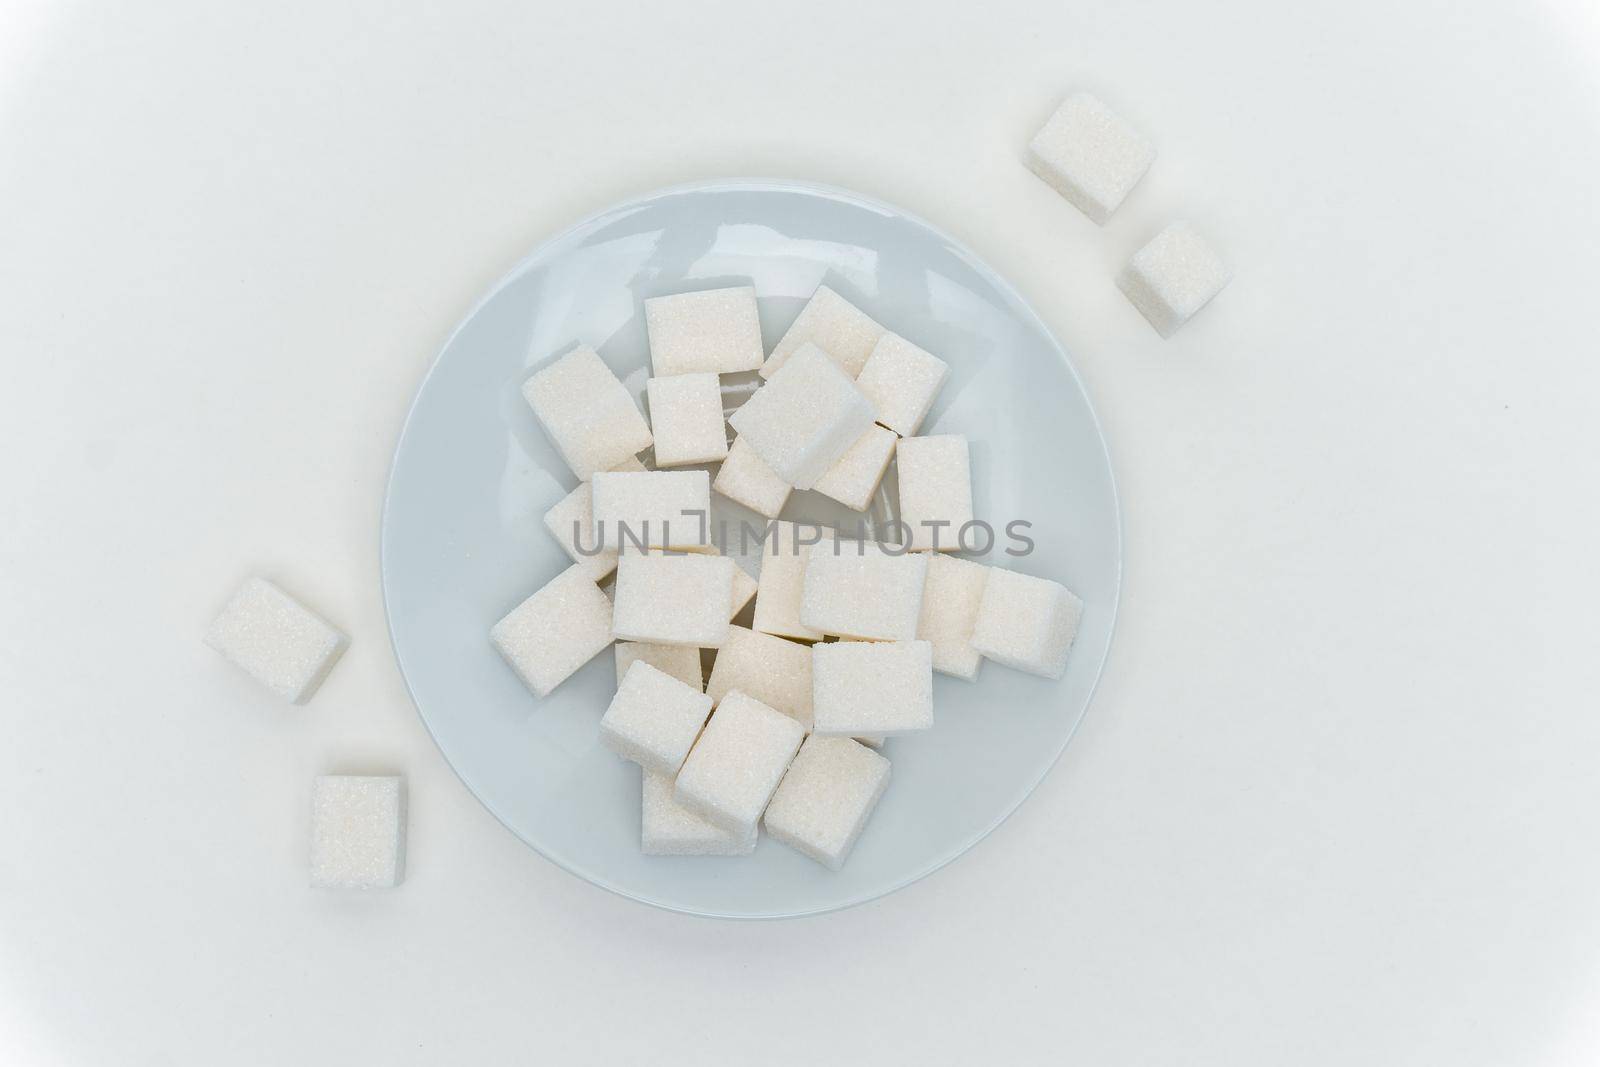 refined sugar cubes on a plate energy calories. High quality photo